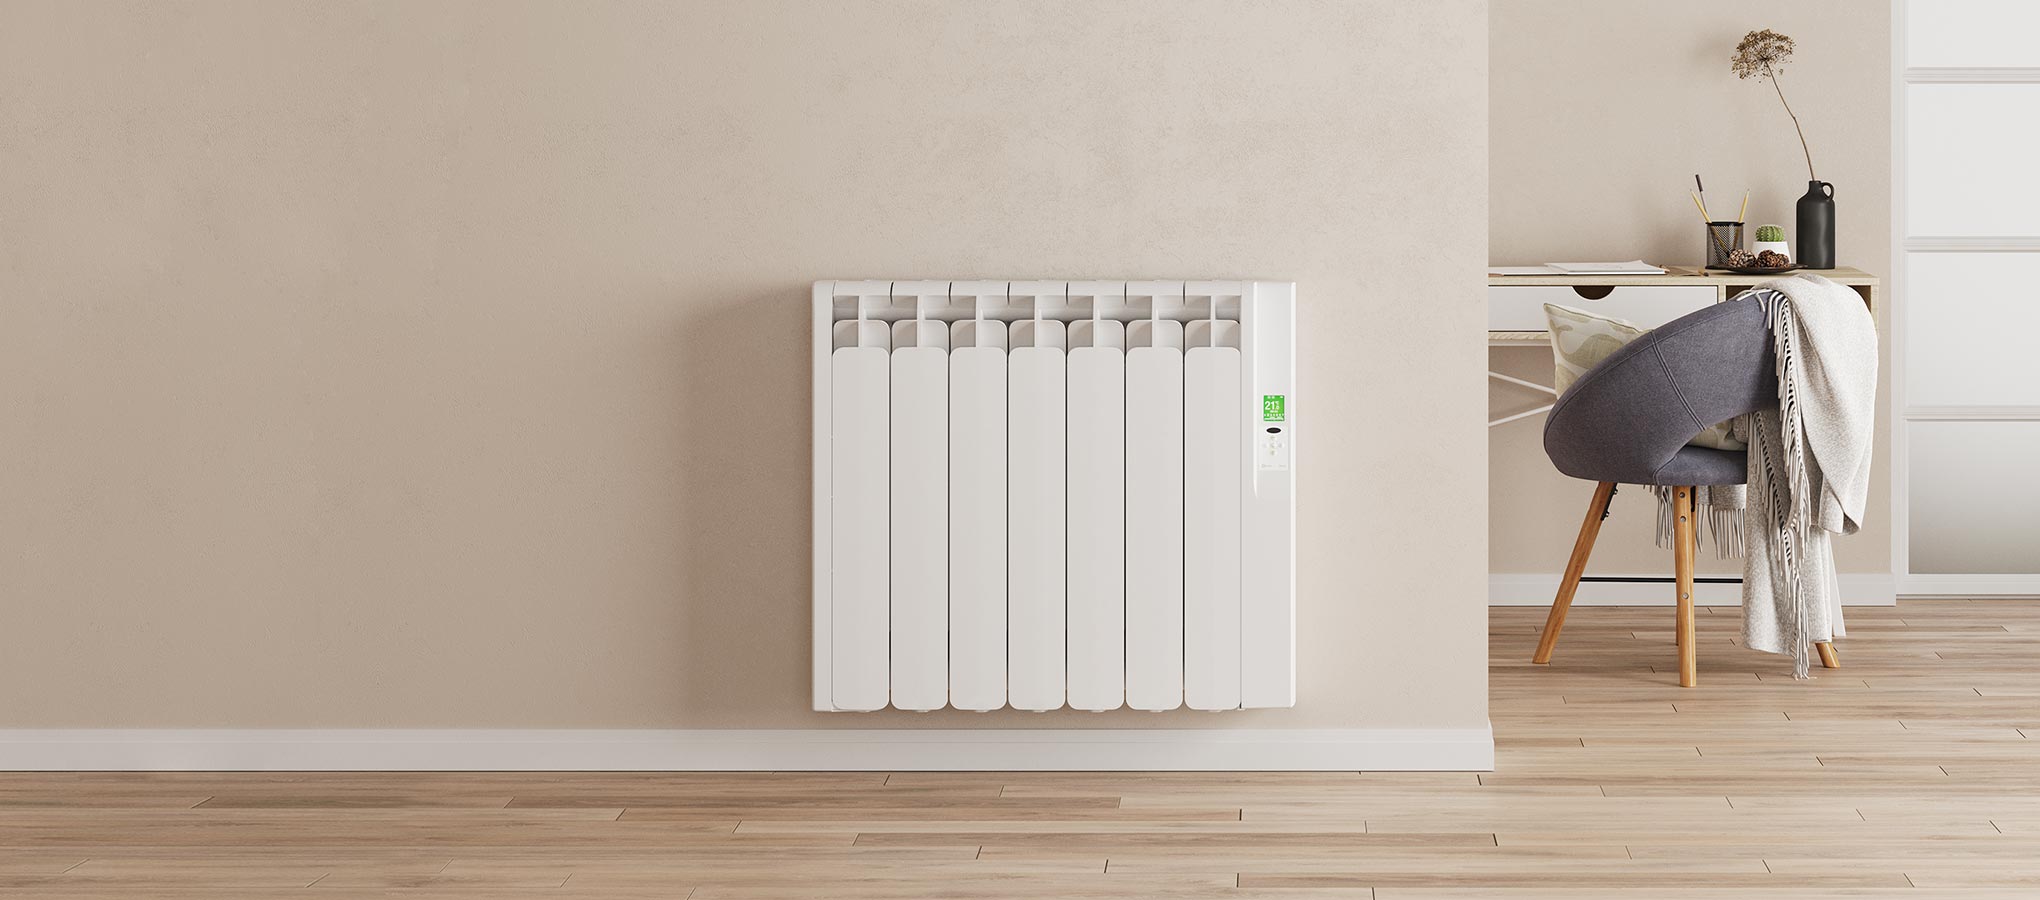 Rointe Kyros smart timer electric radiator in white wall mounted in living room